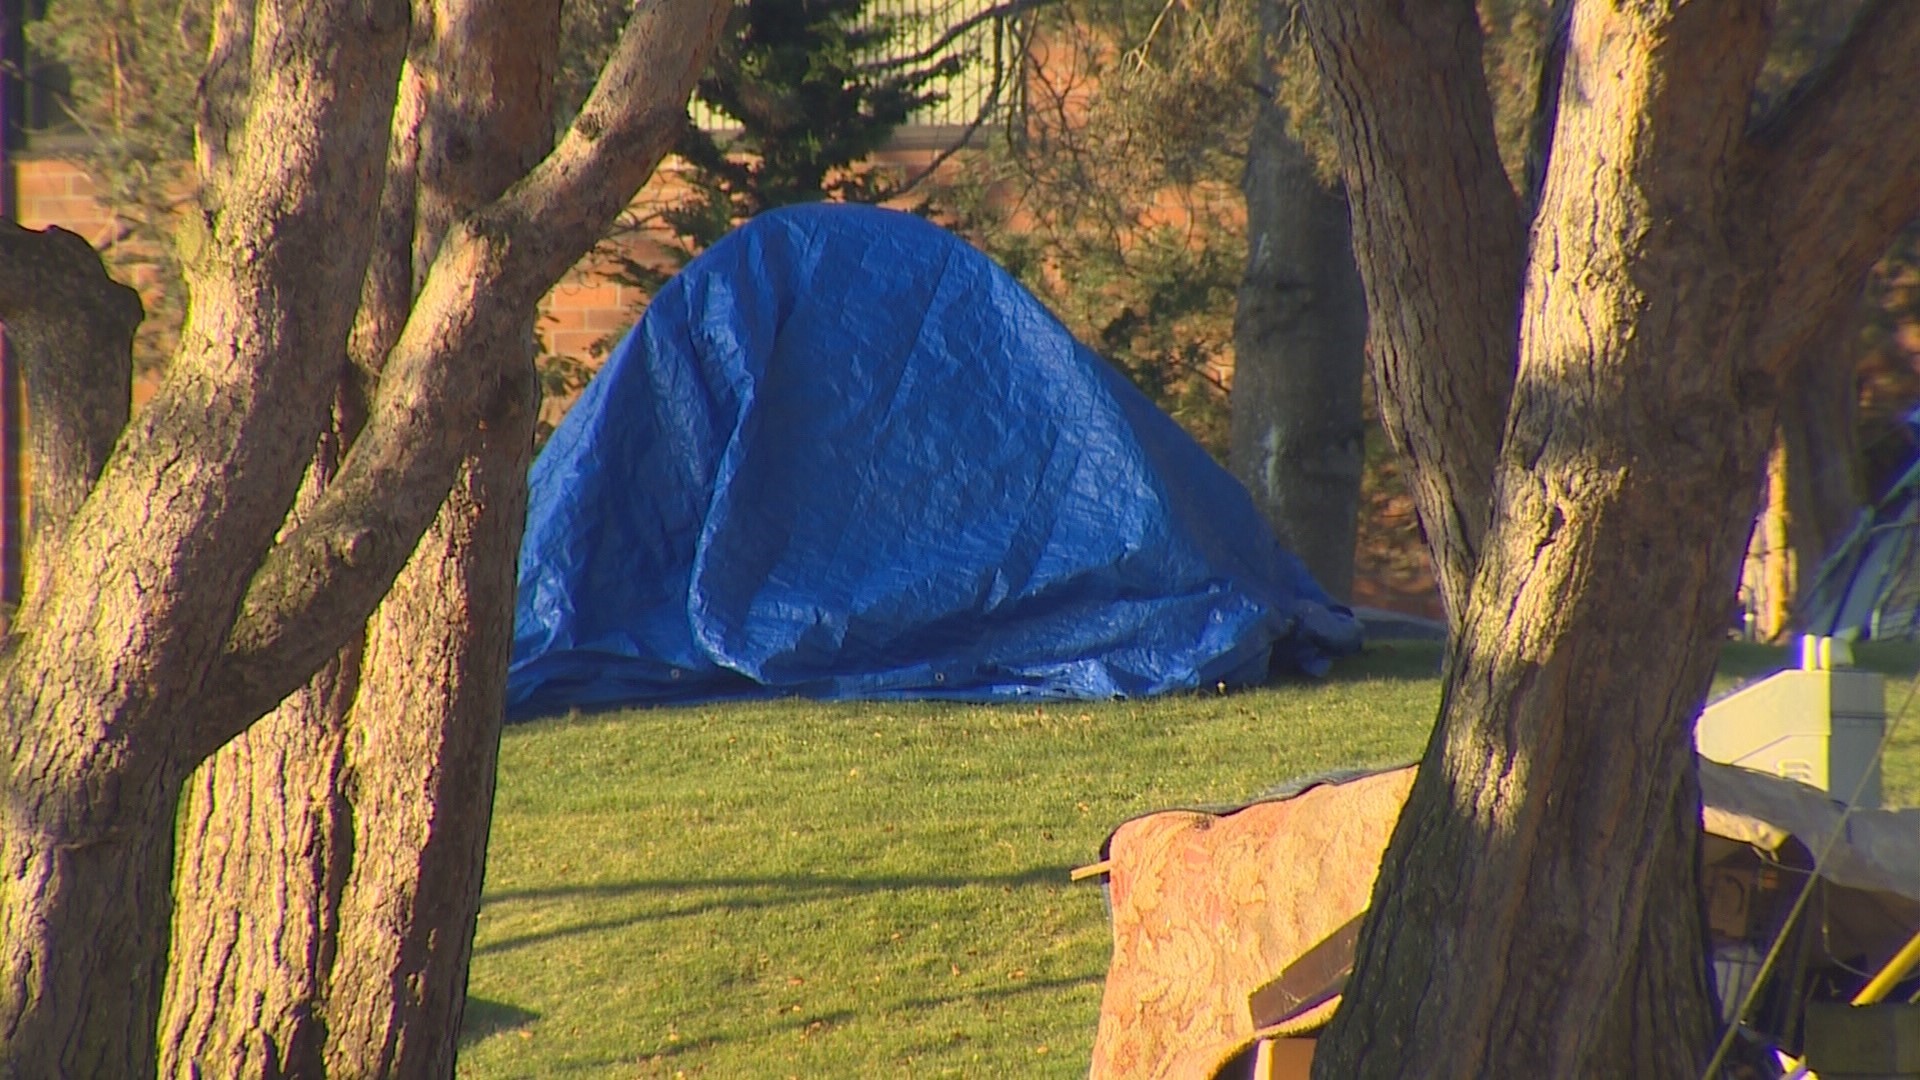 The ban, approved back in October, was meant to improve the safety of Tacoma parks.  It is now delayed until the city can establish an adequate shelter.